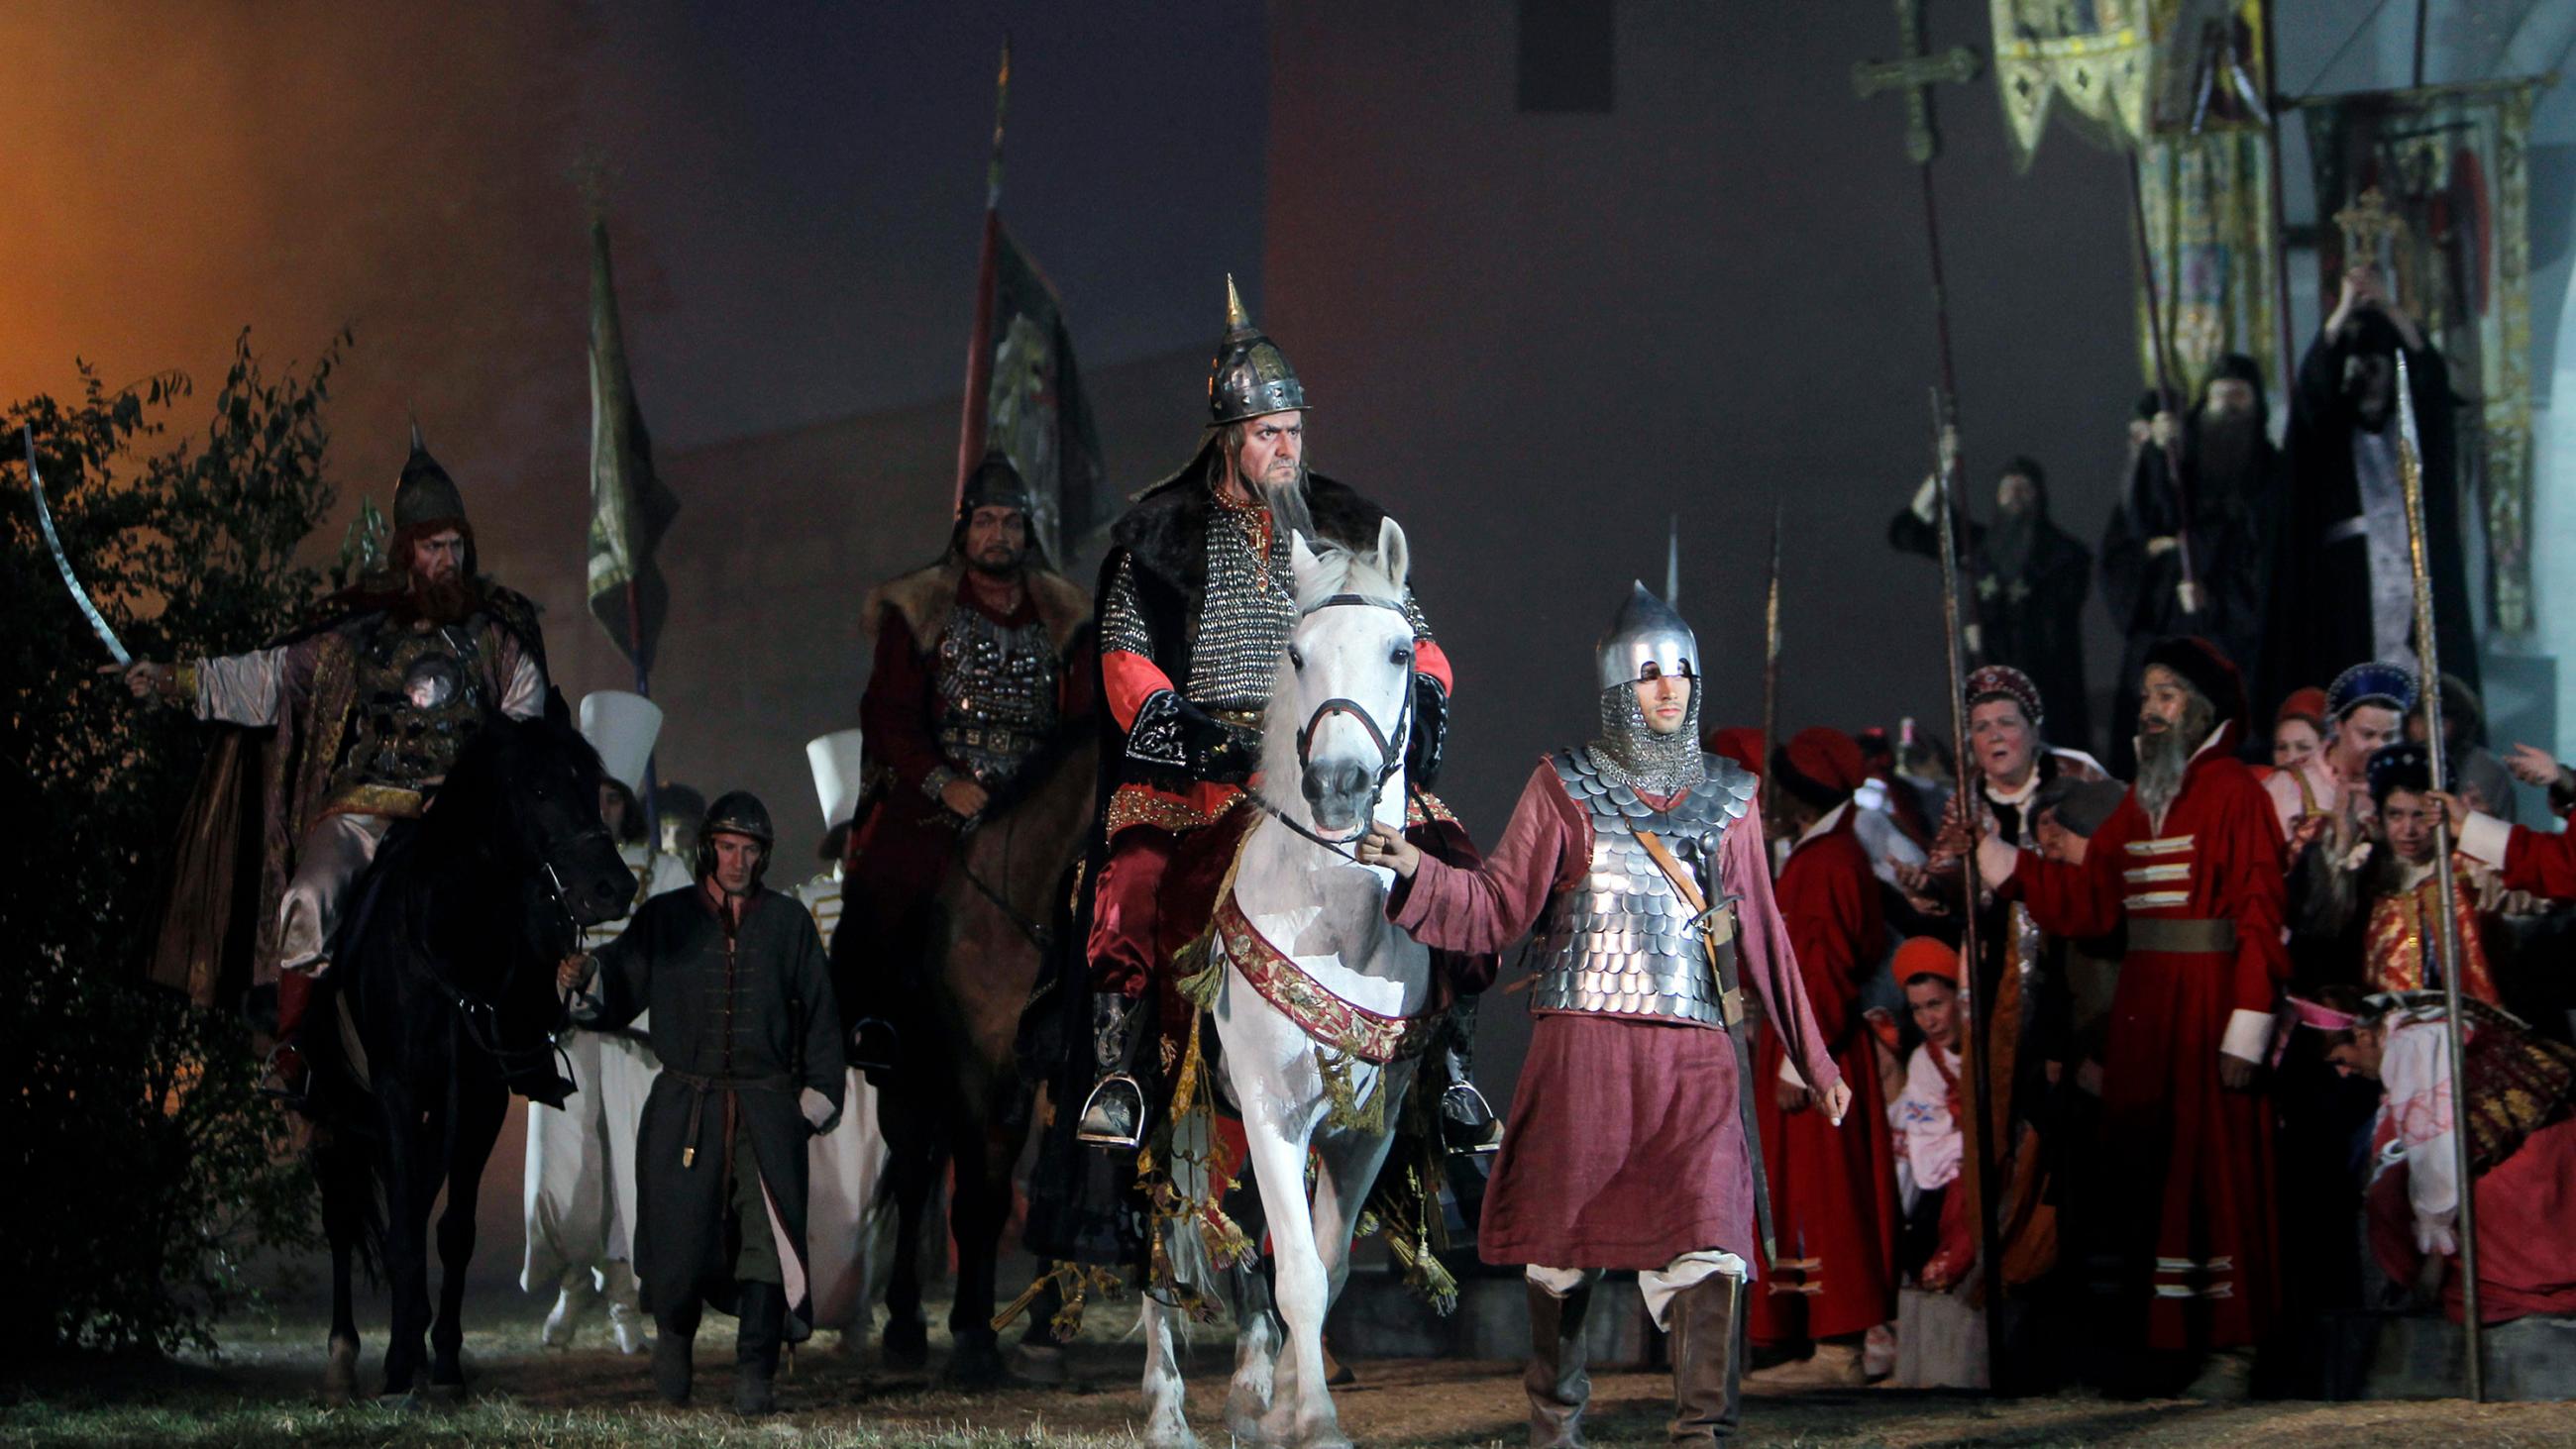 Photo shows the actor on horseback amidst lots of extras in a set with lavish costumes. REUTERS/Denis Sinyakov